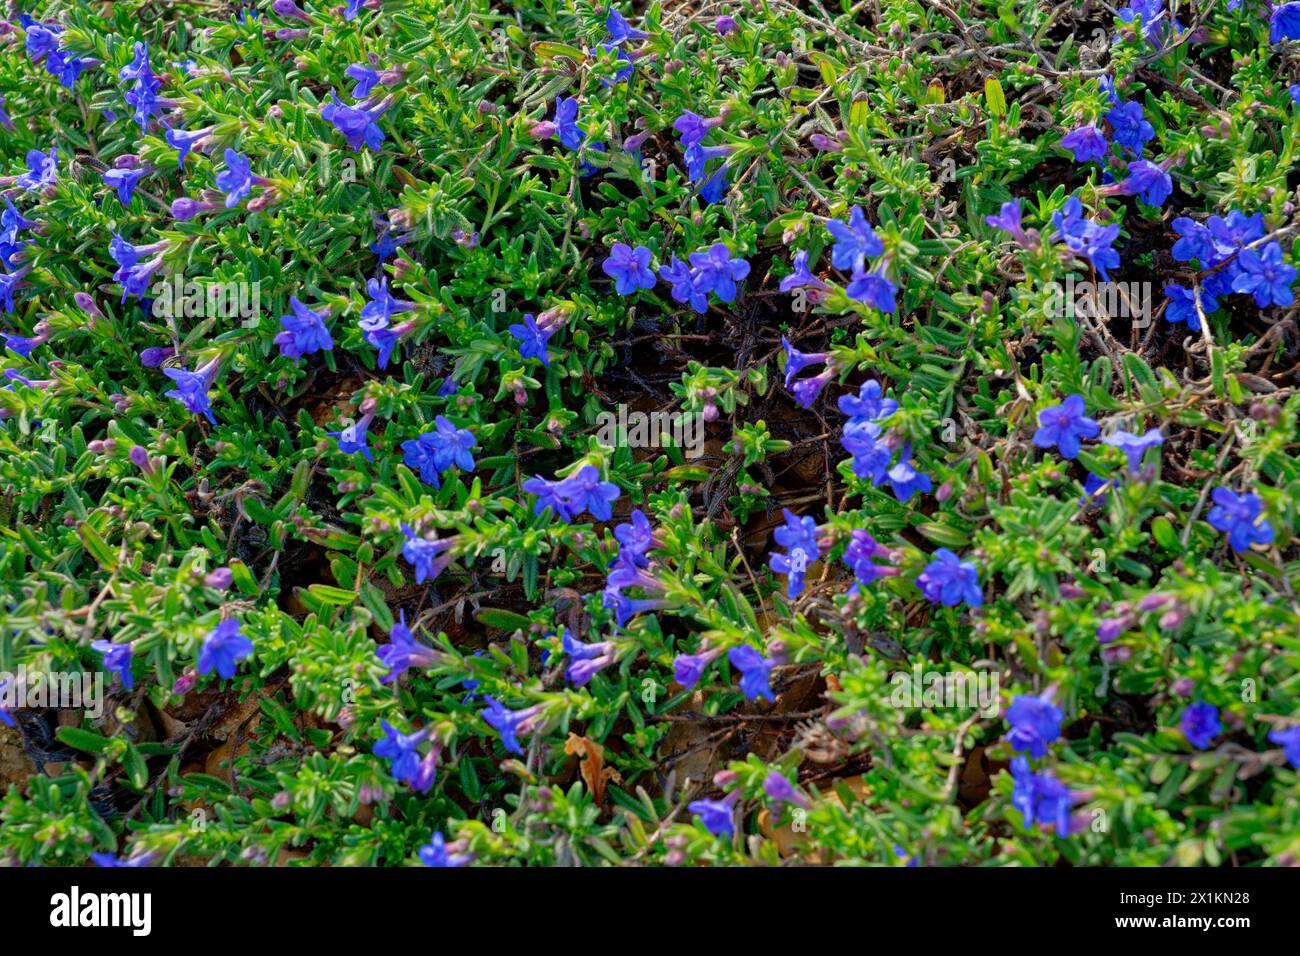 Closeup view of a Lithodora plant that has small true deep blue flowers with many blooms spreading with green foliage in springtime Stock Photo